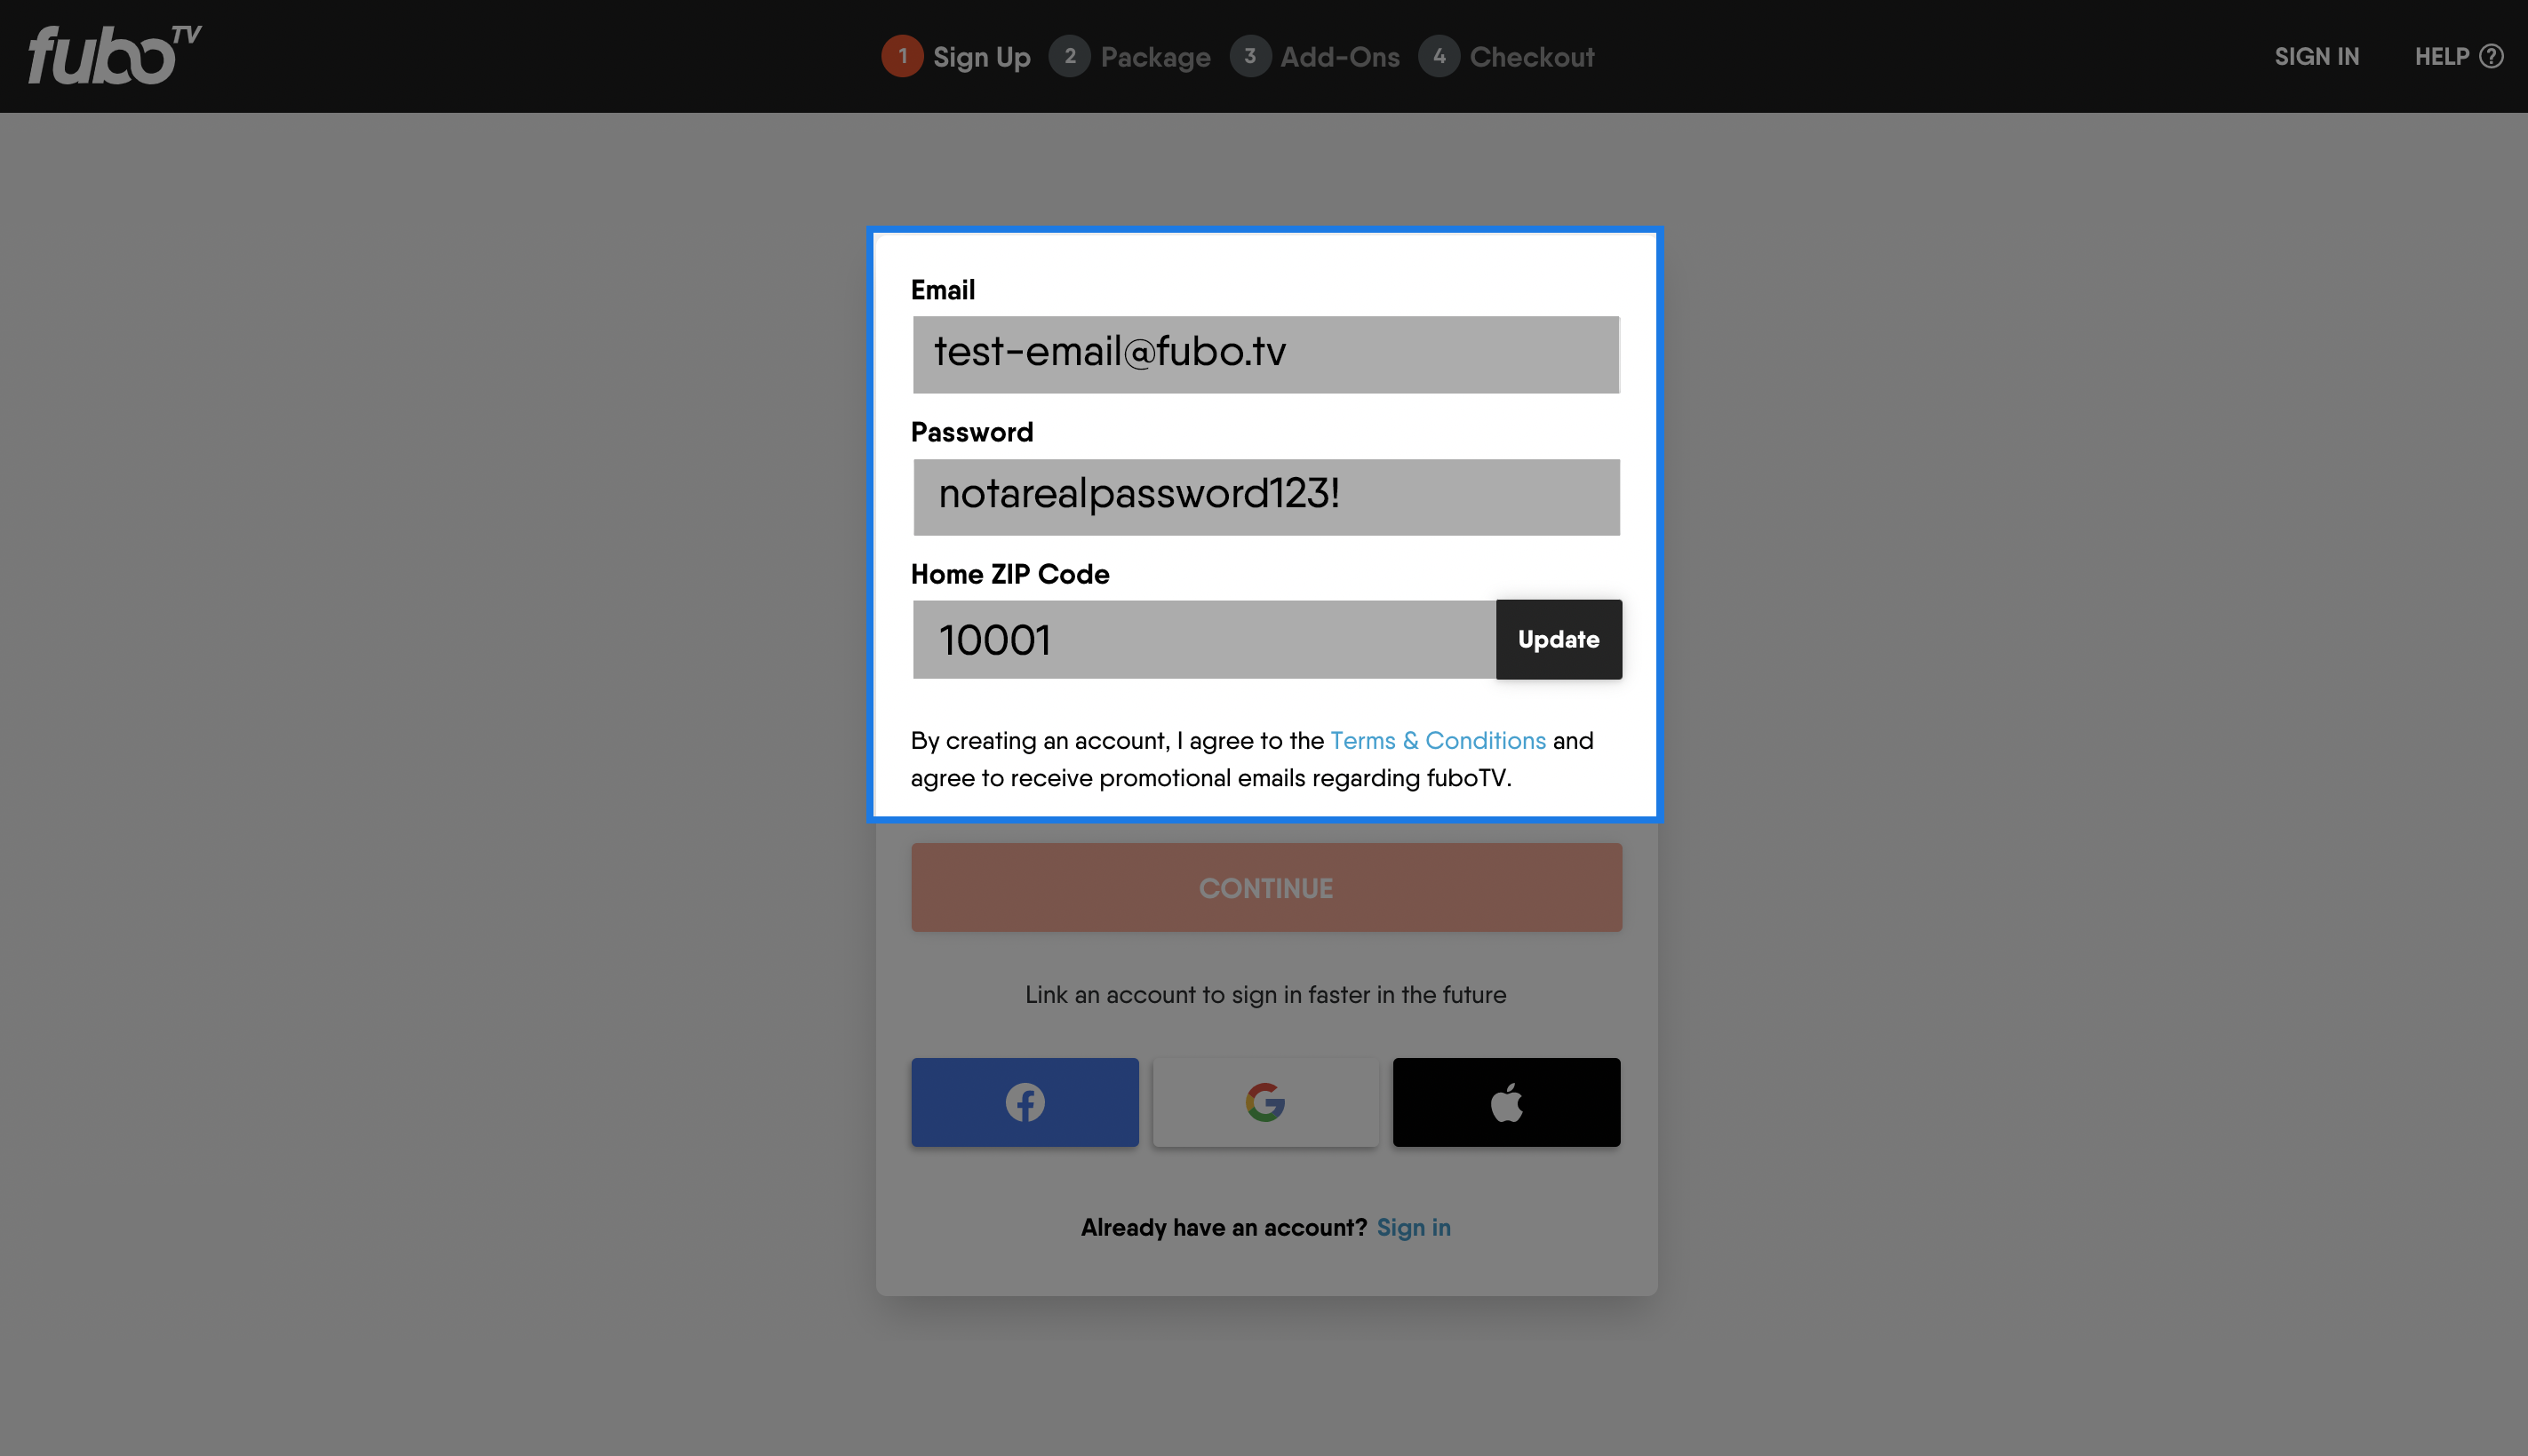 FuboTV account creation first step with fields for EMAIL ADDRESS, PASSWORD, and ZIP CODE highlighted